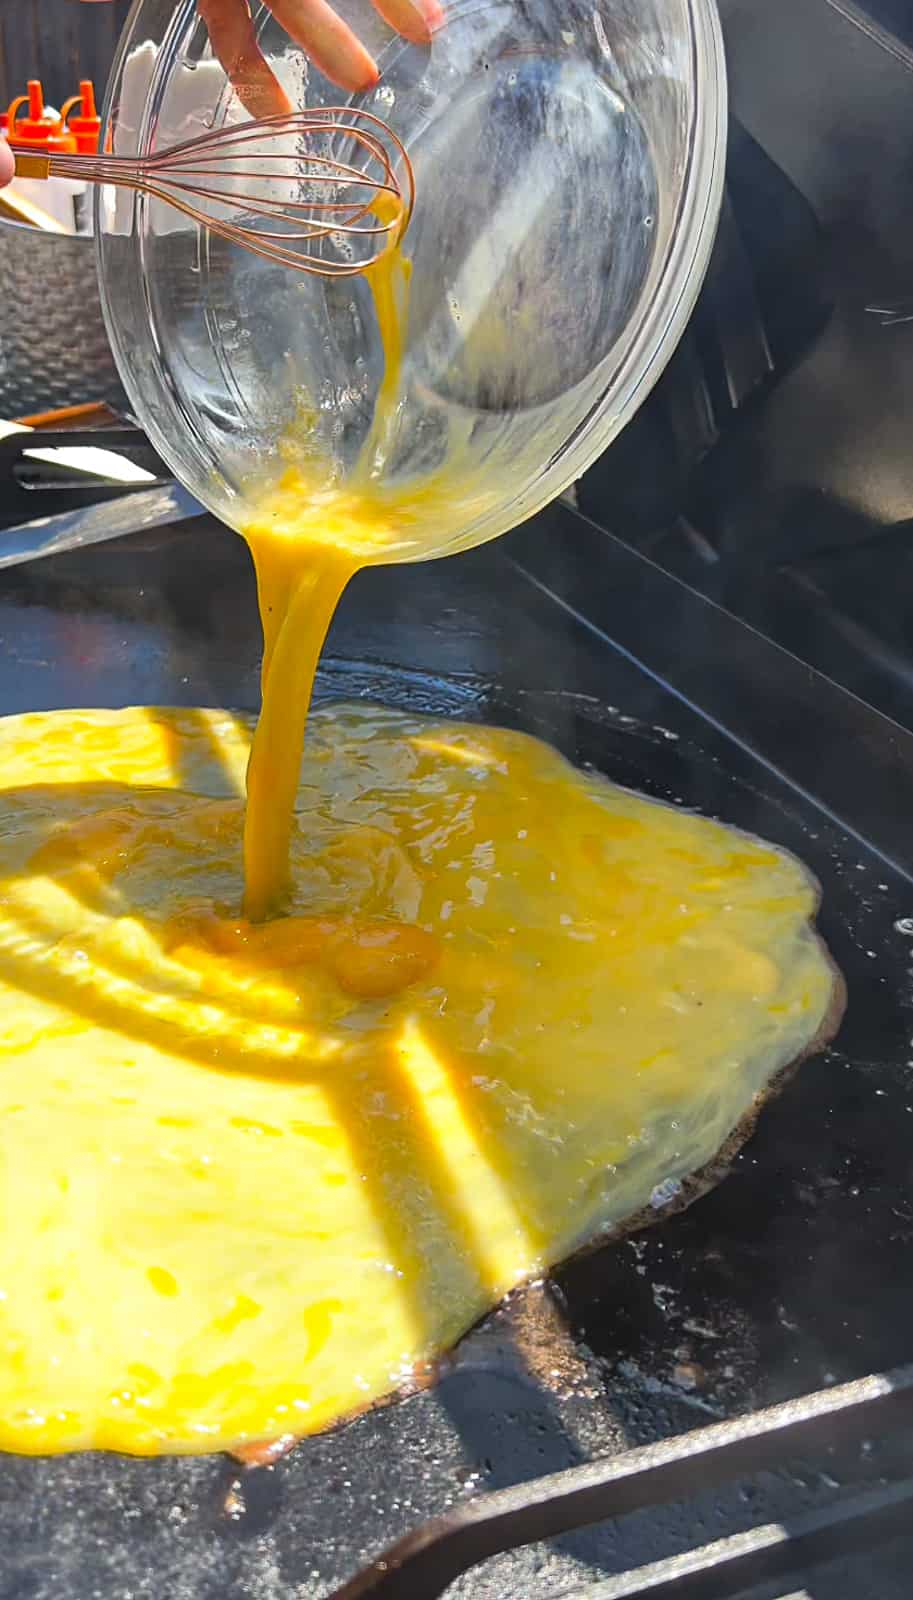 How to Make Perfect Griddle Scrambled Eggs Every Time